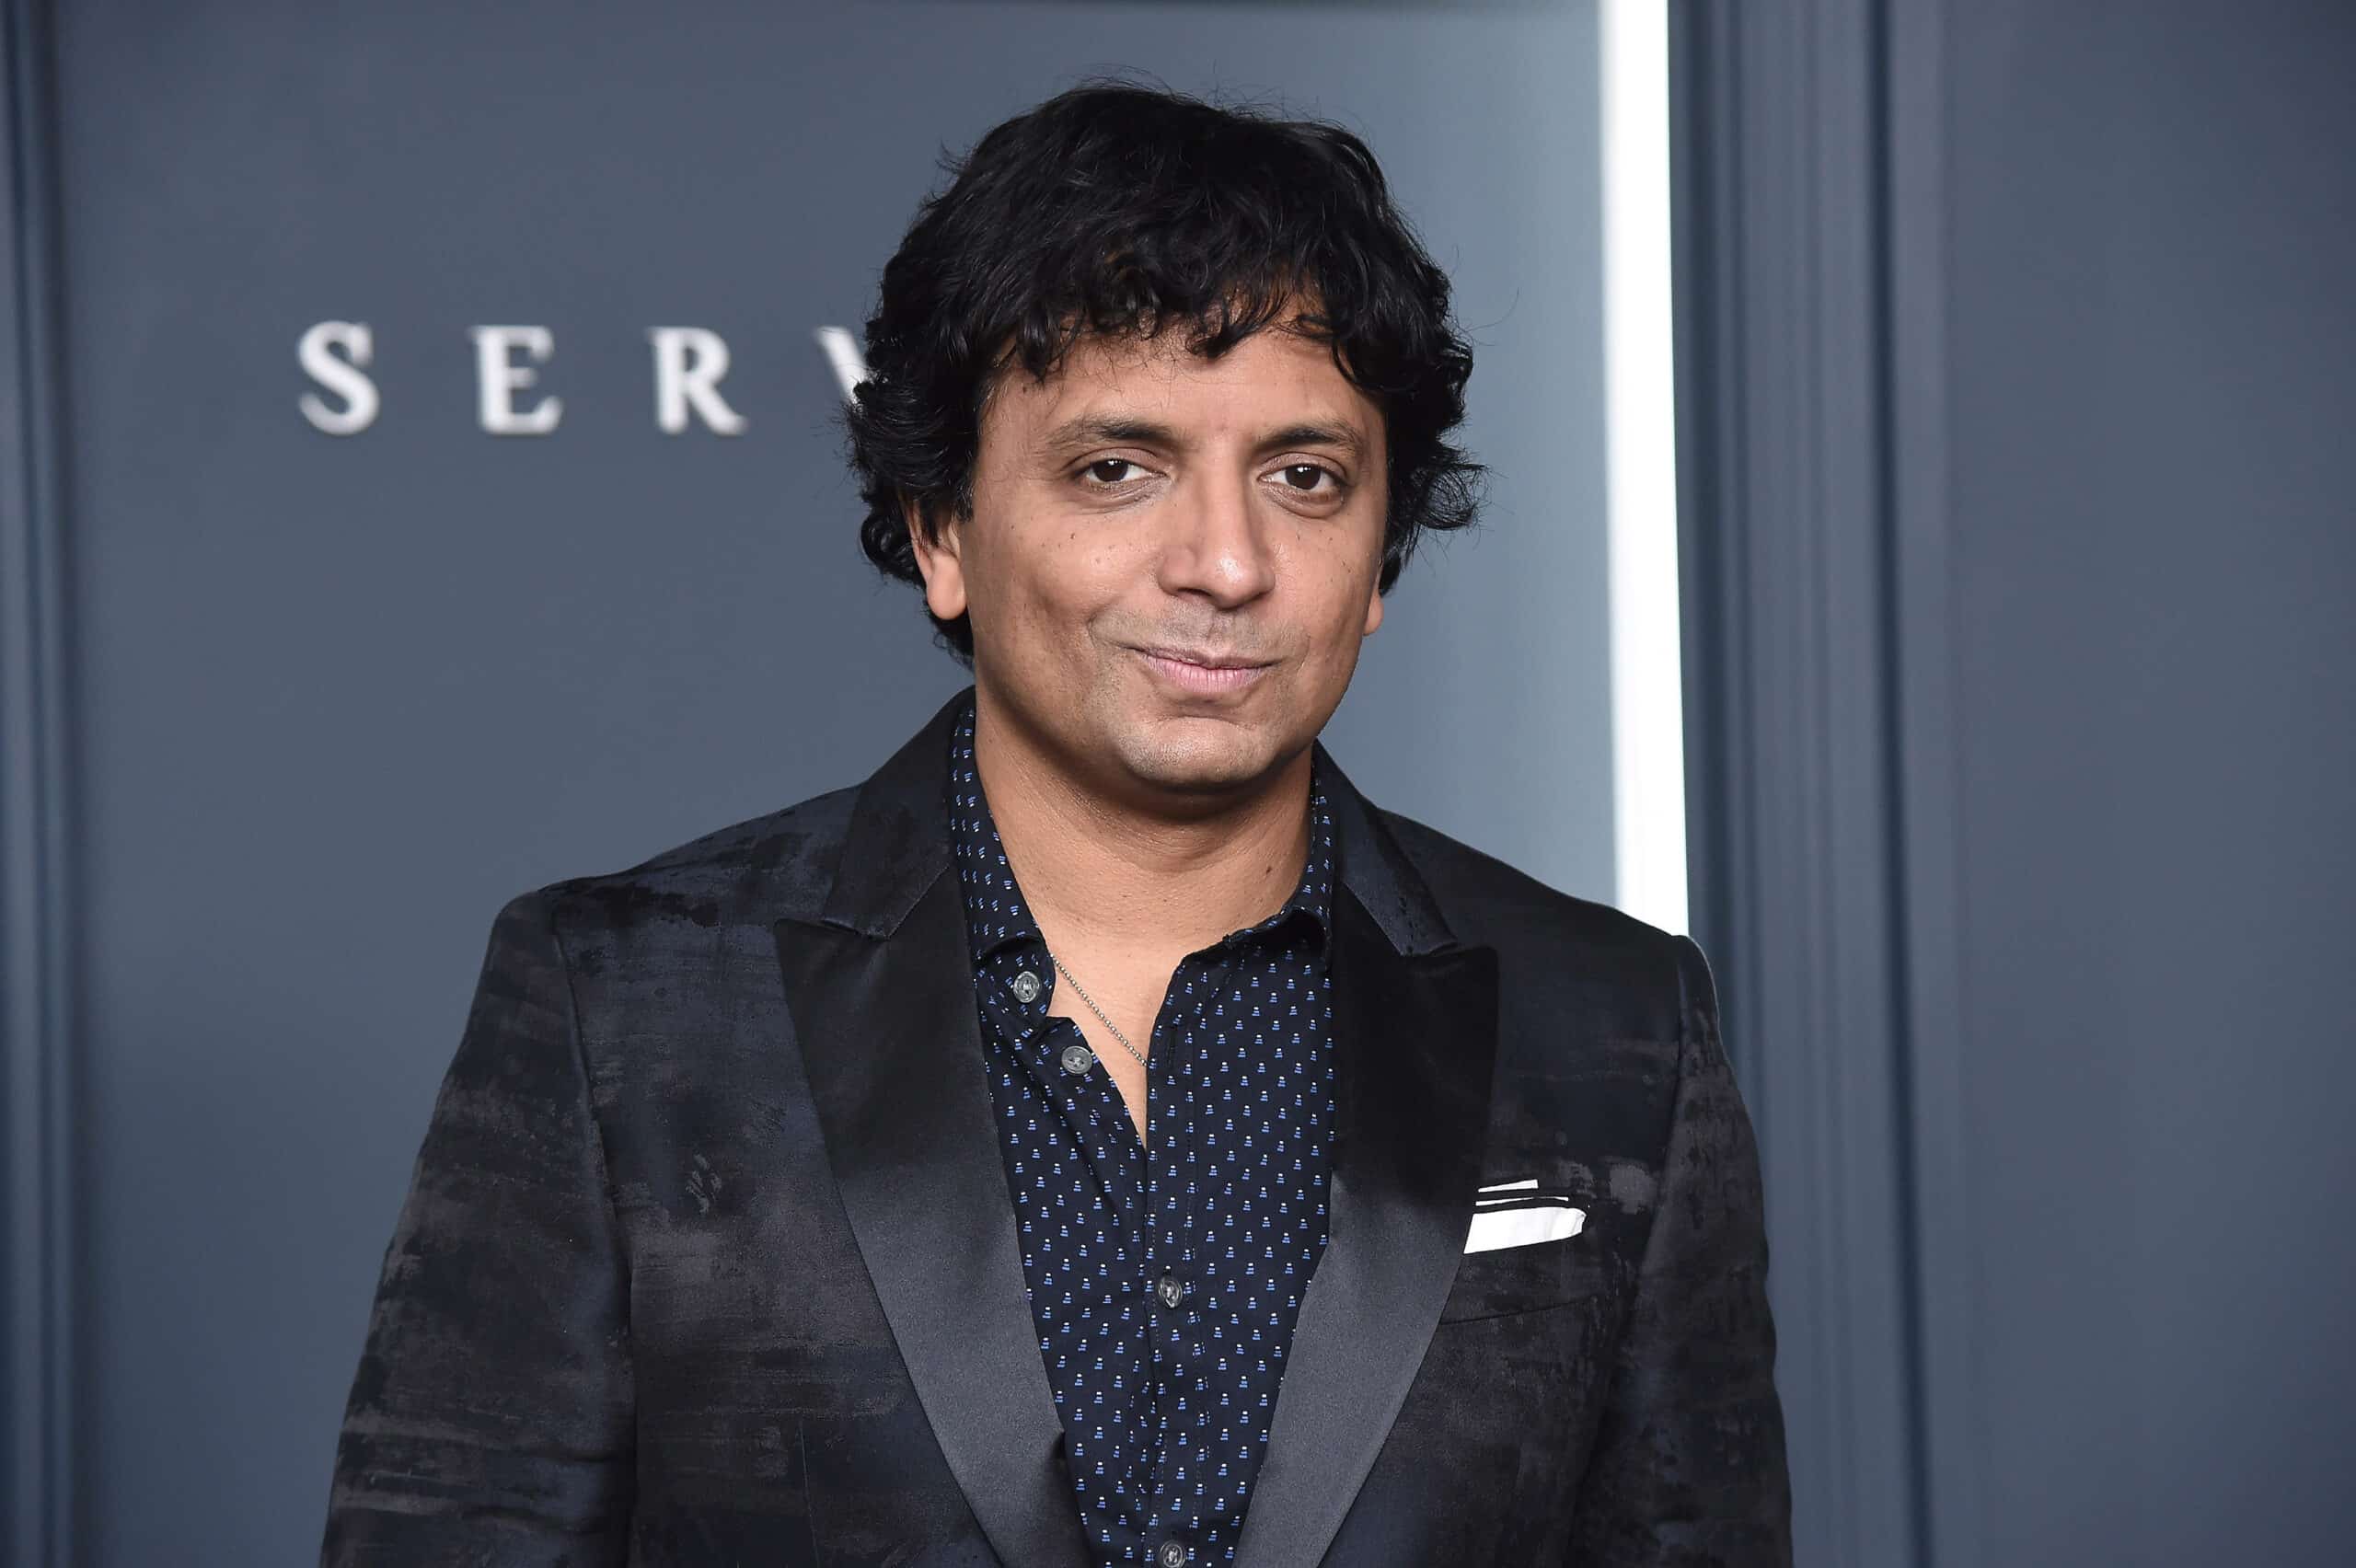 M. Night Shyamalan has inked a new multi-year, first-look deal with Warner Bros. Pictures, with the Oscar-nominated filmmaker switching his allegiance from Universal